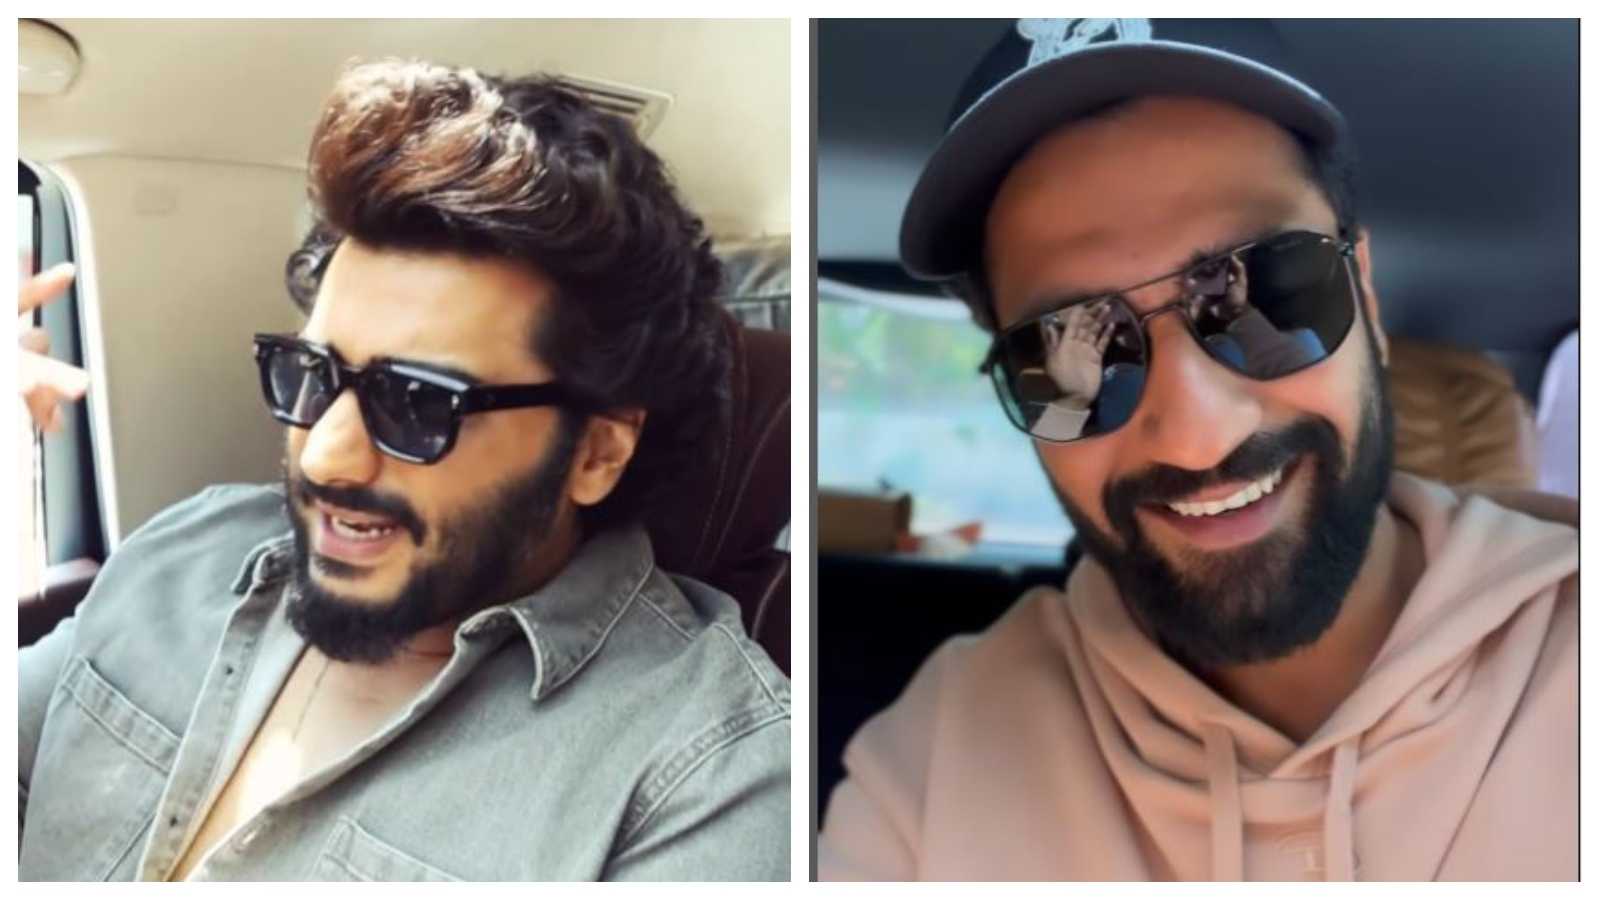 'Your obsession has passed on': Arjun Kapoor credits Vicky Kaushal as he vibes to a Punjabi song in the car